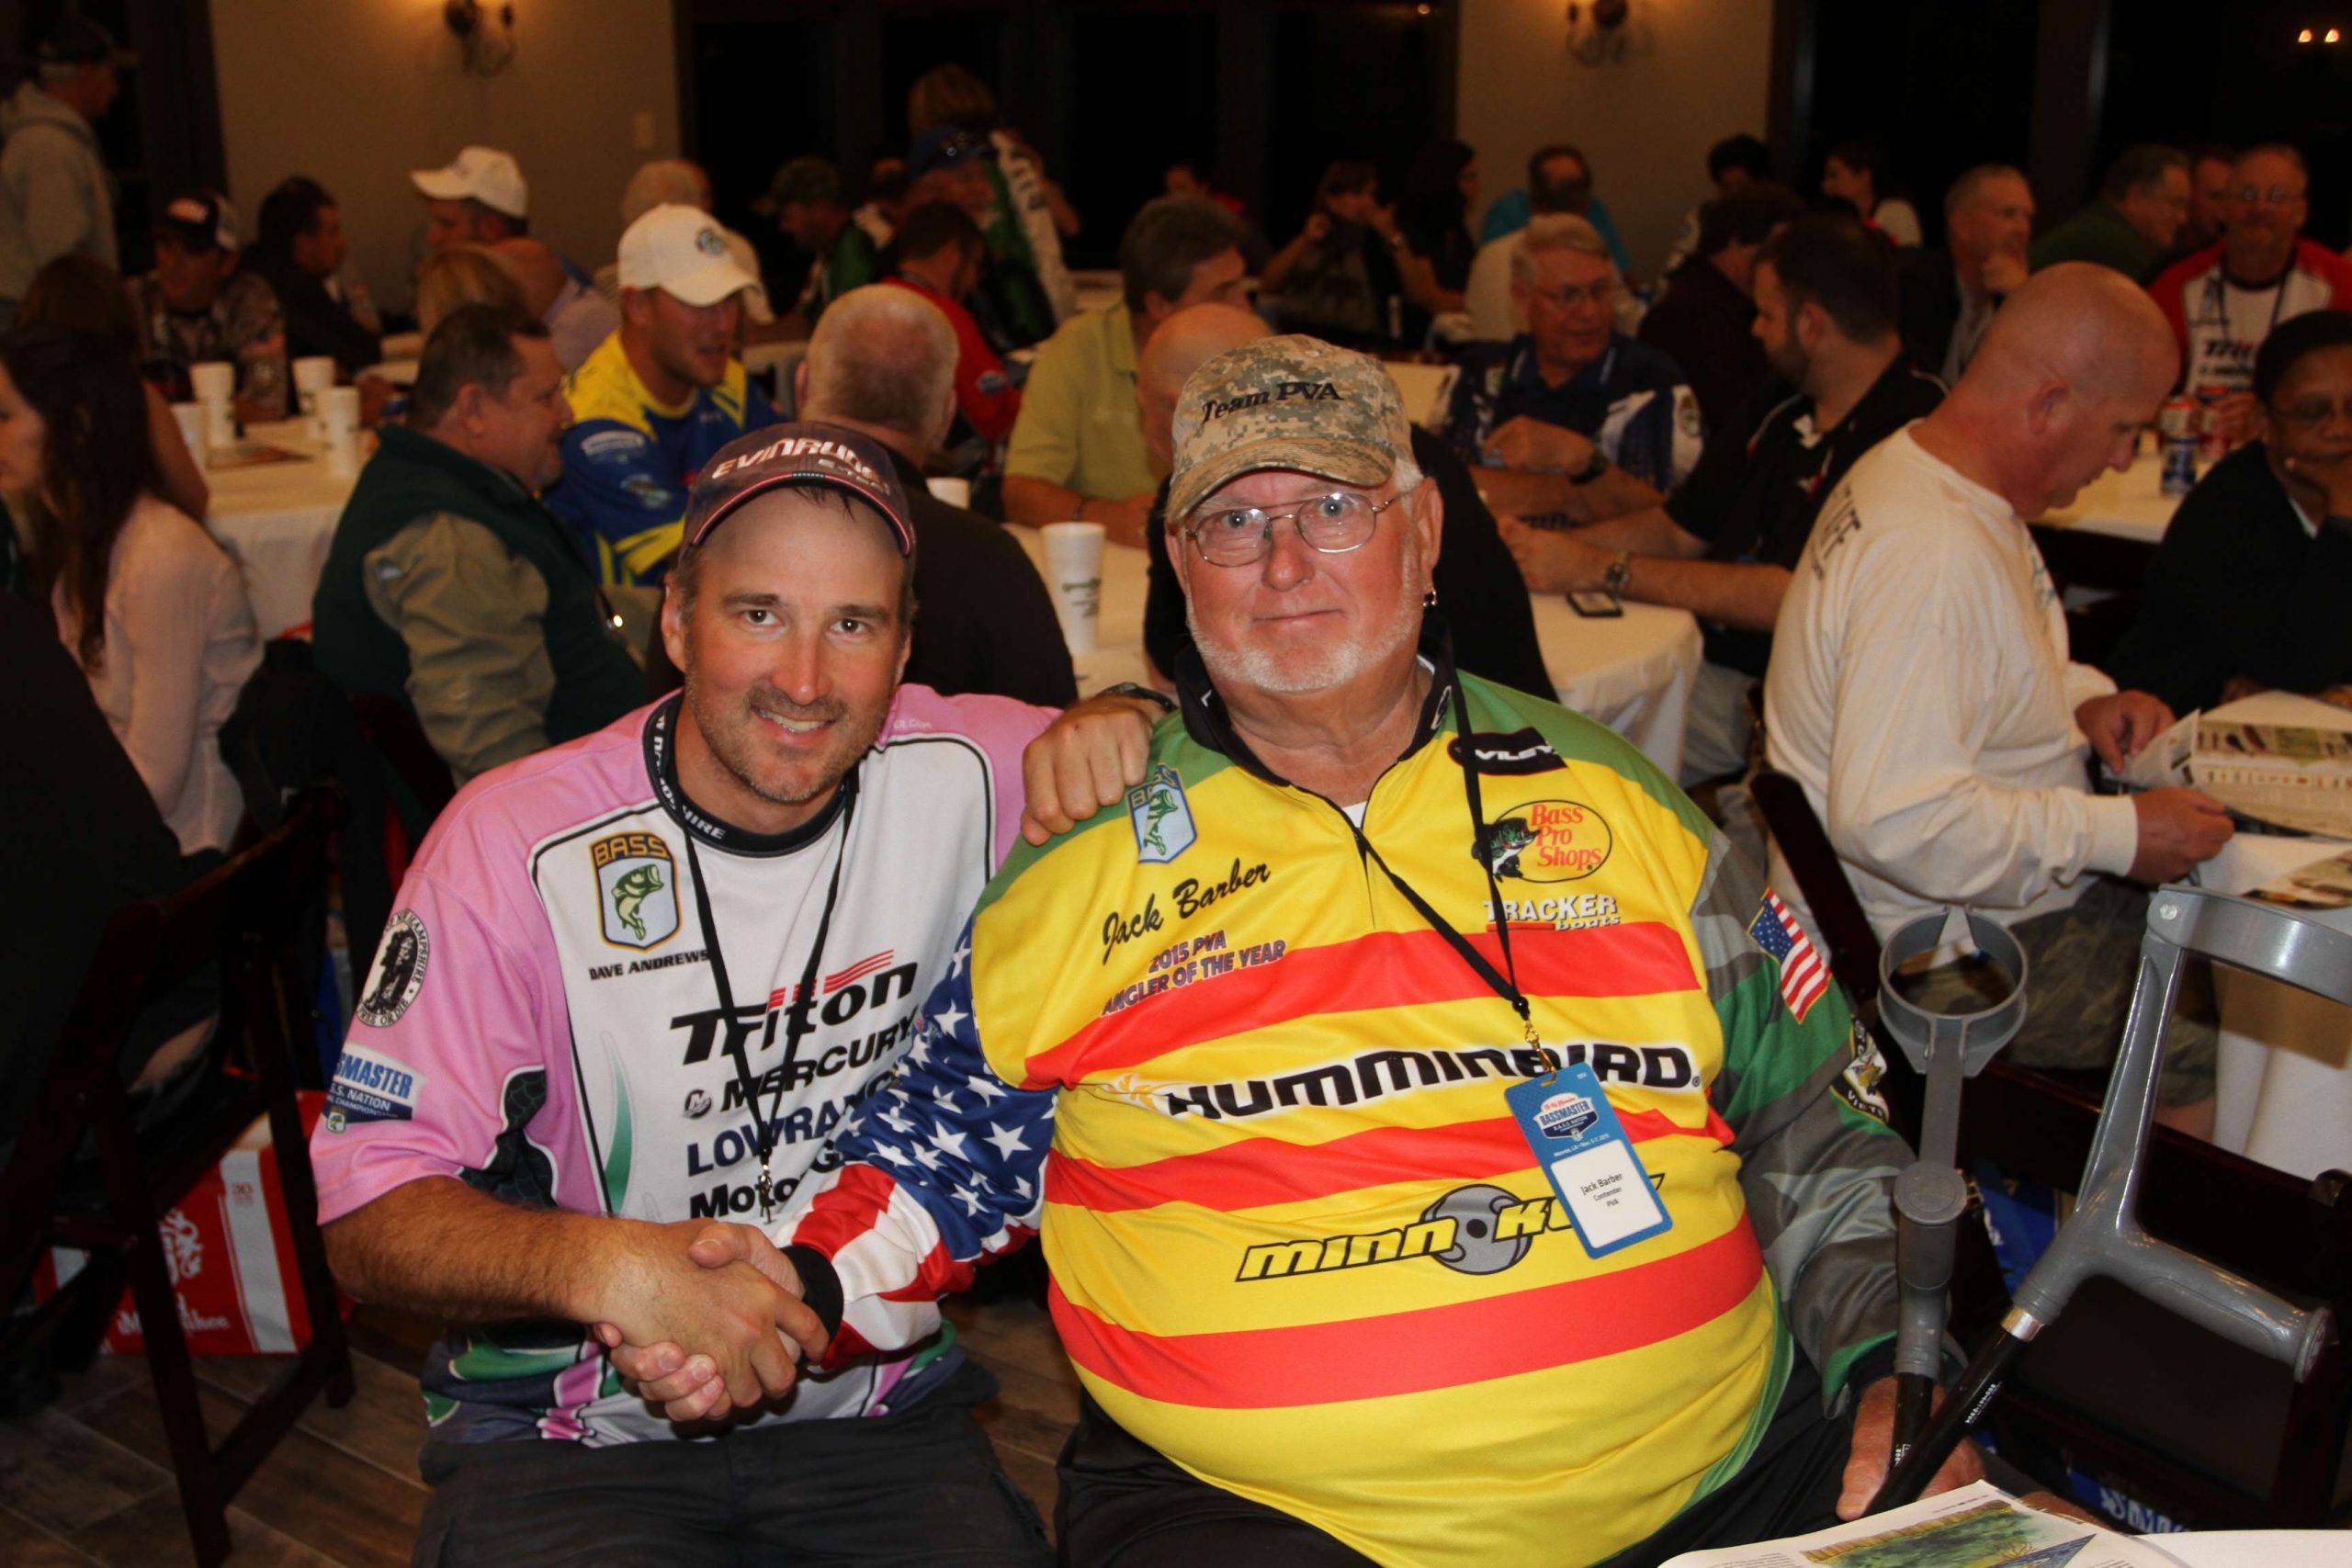 Massachusetts' Dave Andrews hangs with PVA competitor Jack Barber.